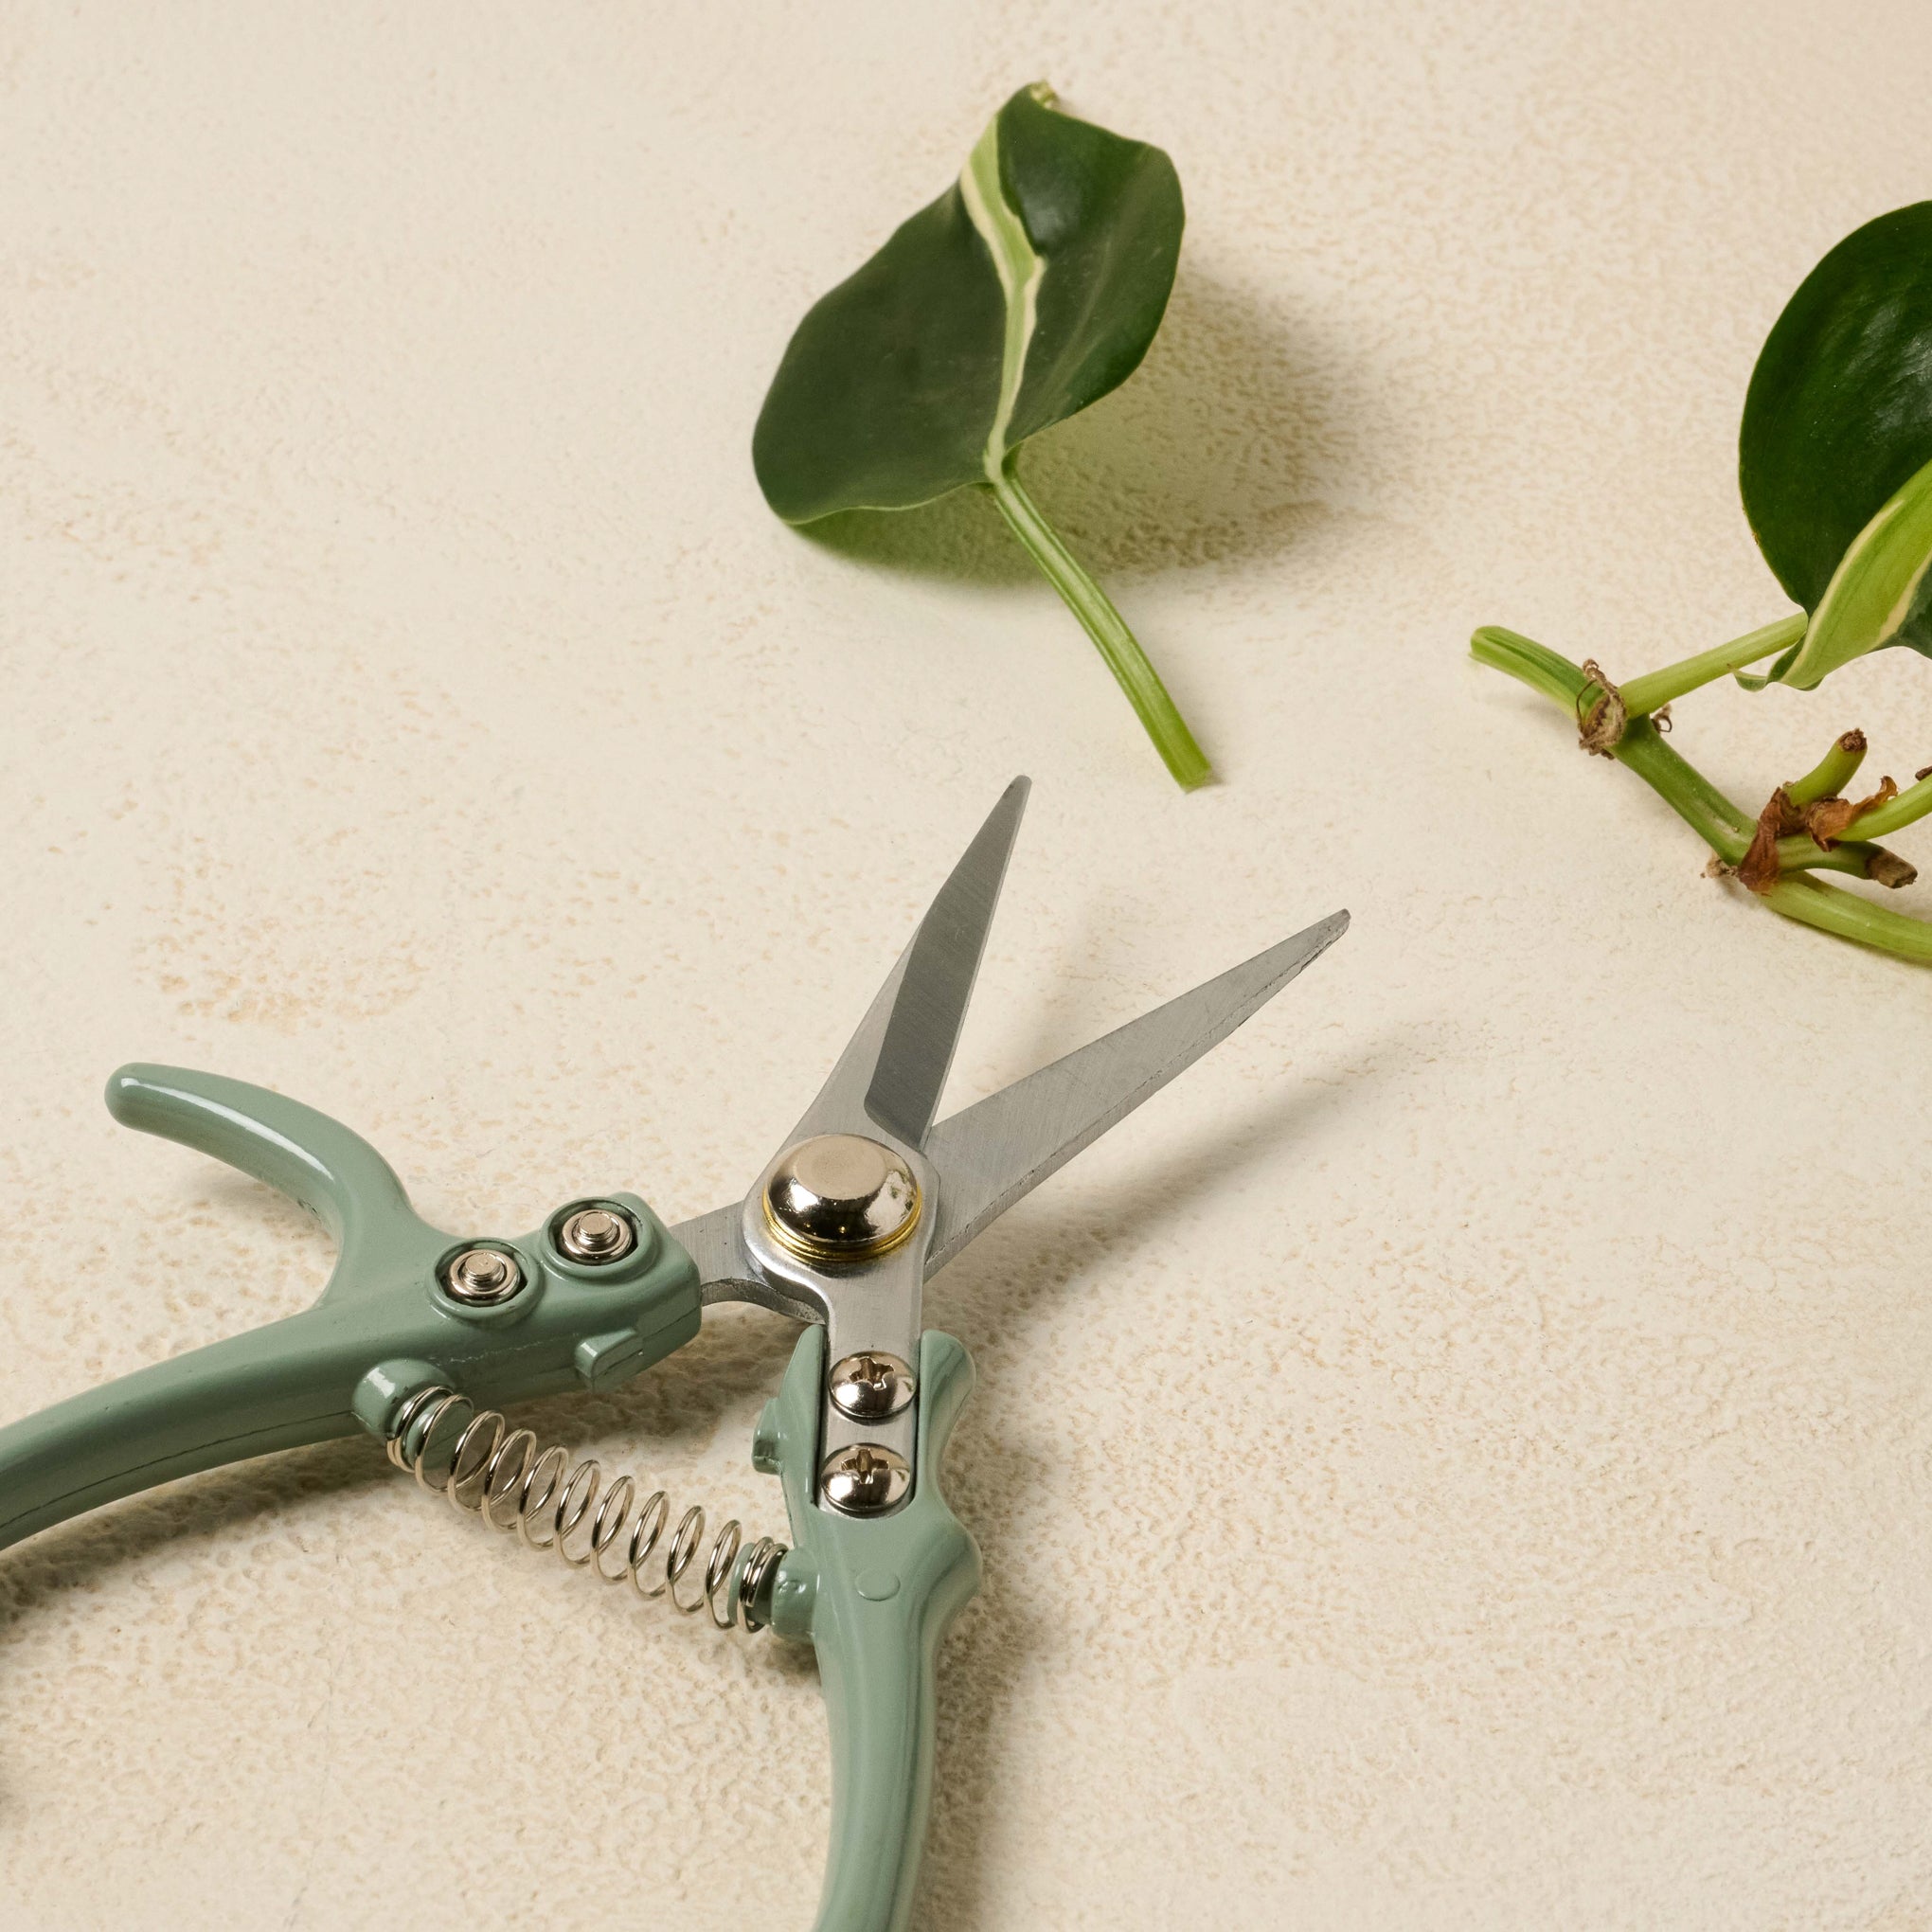 Pale Mint Pruning Shears next to cut leaves $18.00